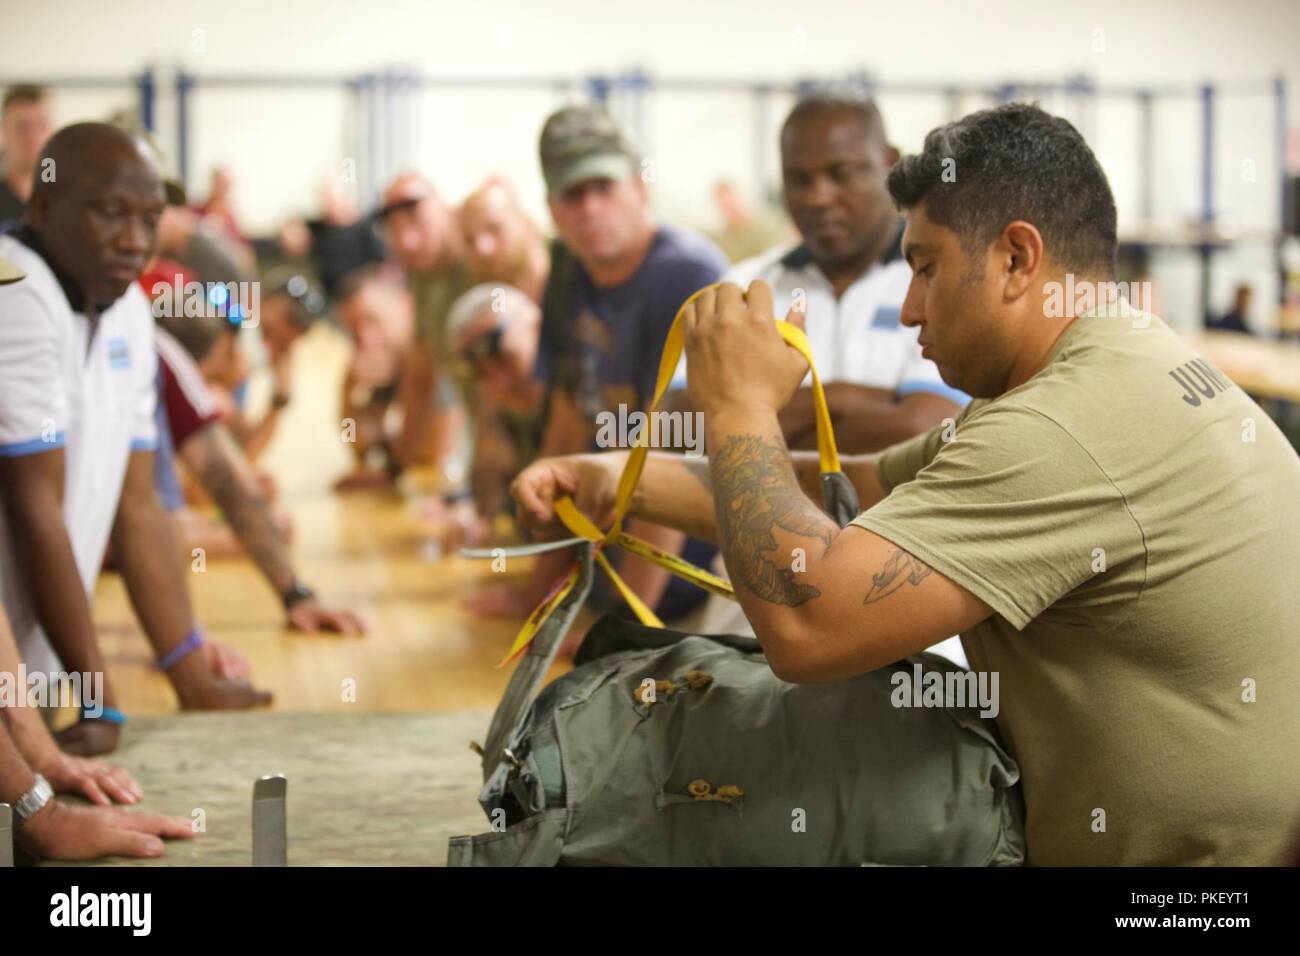 U.S. Army Sgt. Roger Montanez, assigned to Rigger Detachment, 56th Troop Command, teaches a group of International Paratroopers how to pack a MC-6 parachute at Building 216, Parachute Rigger Facility Shed, during Leapfest 2018 at West Kingston, RI., August 3, 2018. Leapfest is the largest, longest standing, international static line parachute training event and competition hosted by the 56th Troop Command, Rhode Island Army National Guard to promote high level technical training and esprit de corps within the International Airborne community. Stock Photo